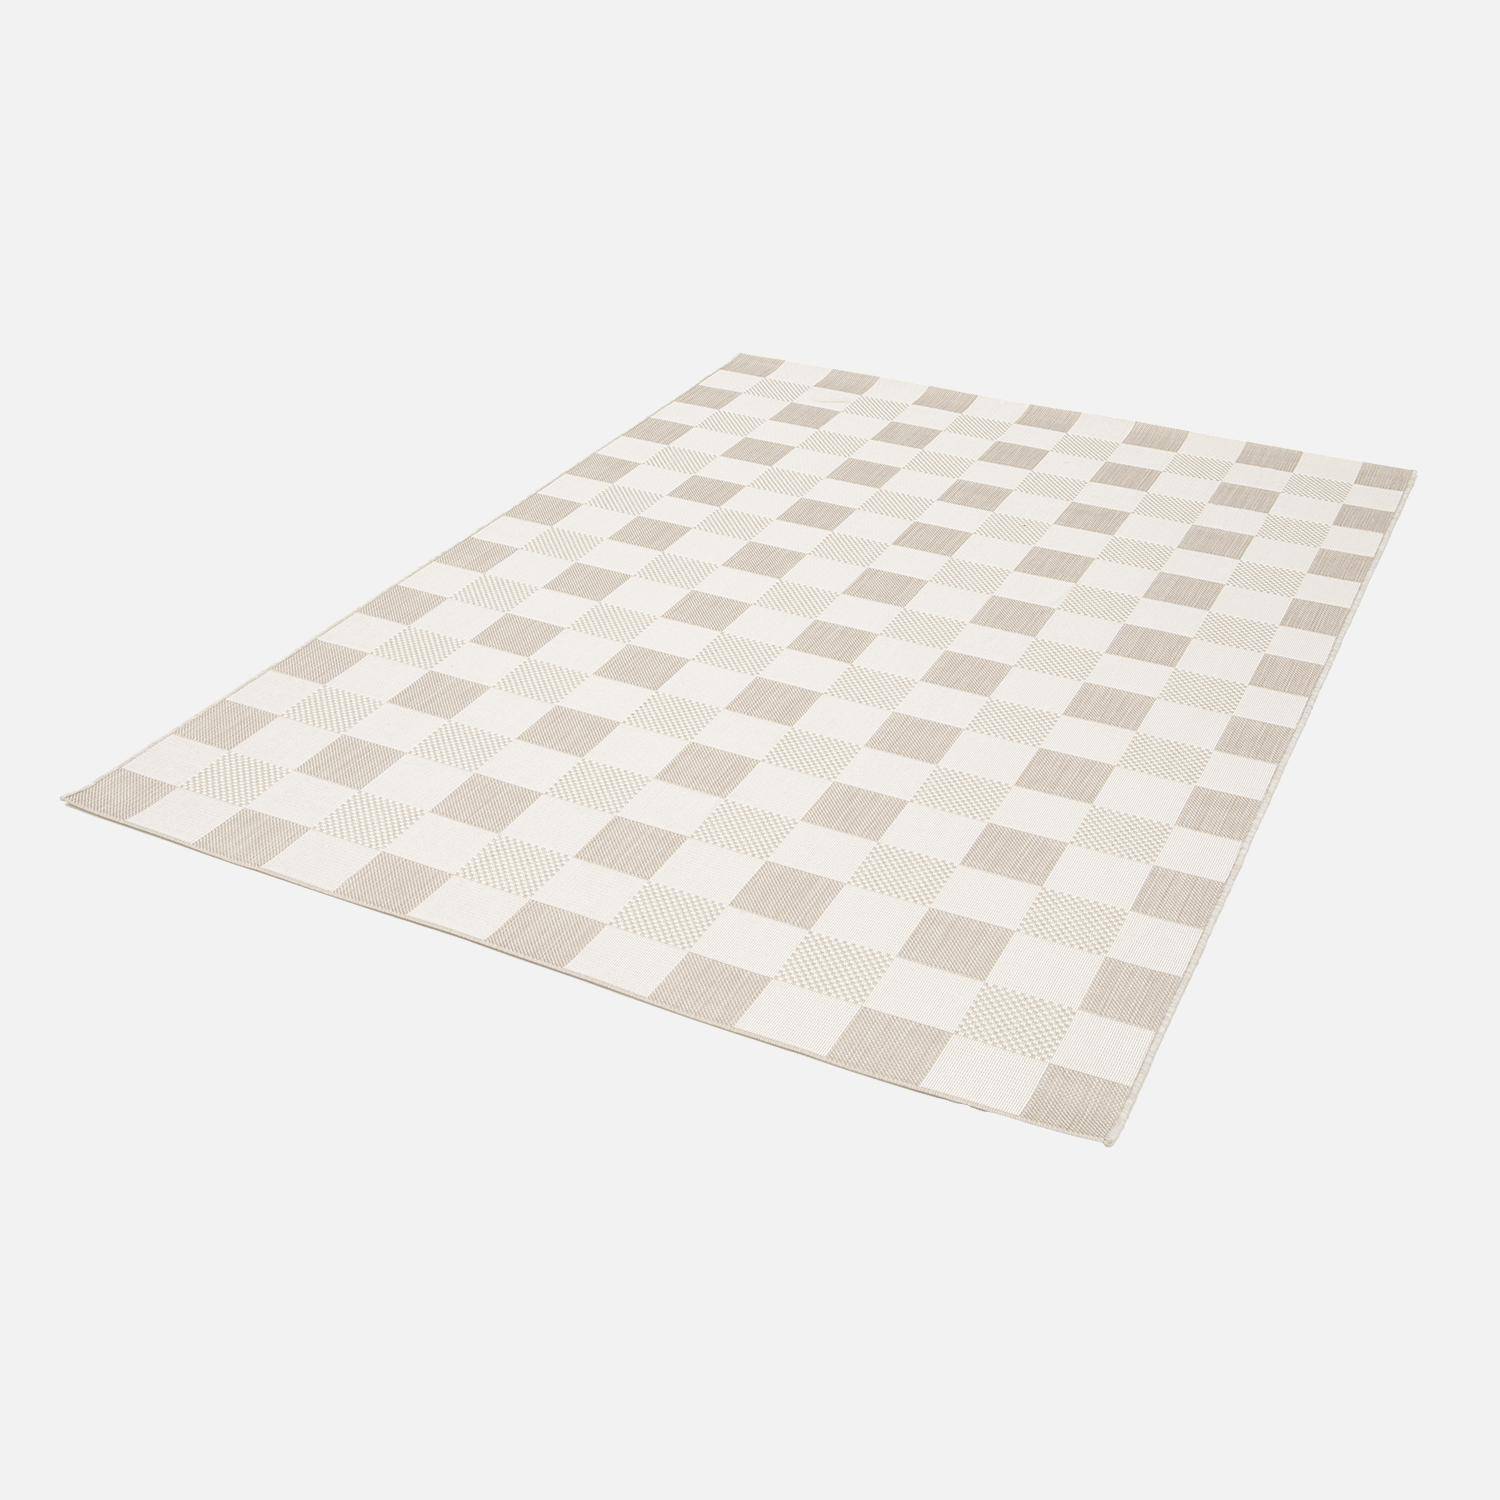 Indoor/outdoor carpet with beige chequered pattern, recycled polyester, Damian, 120 x 170 cm,sweeek,Photo4